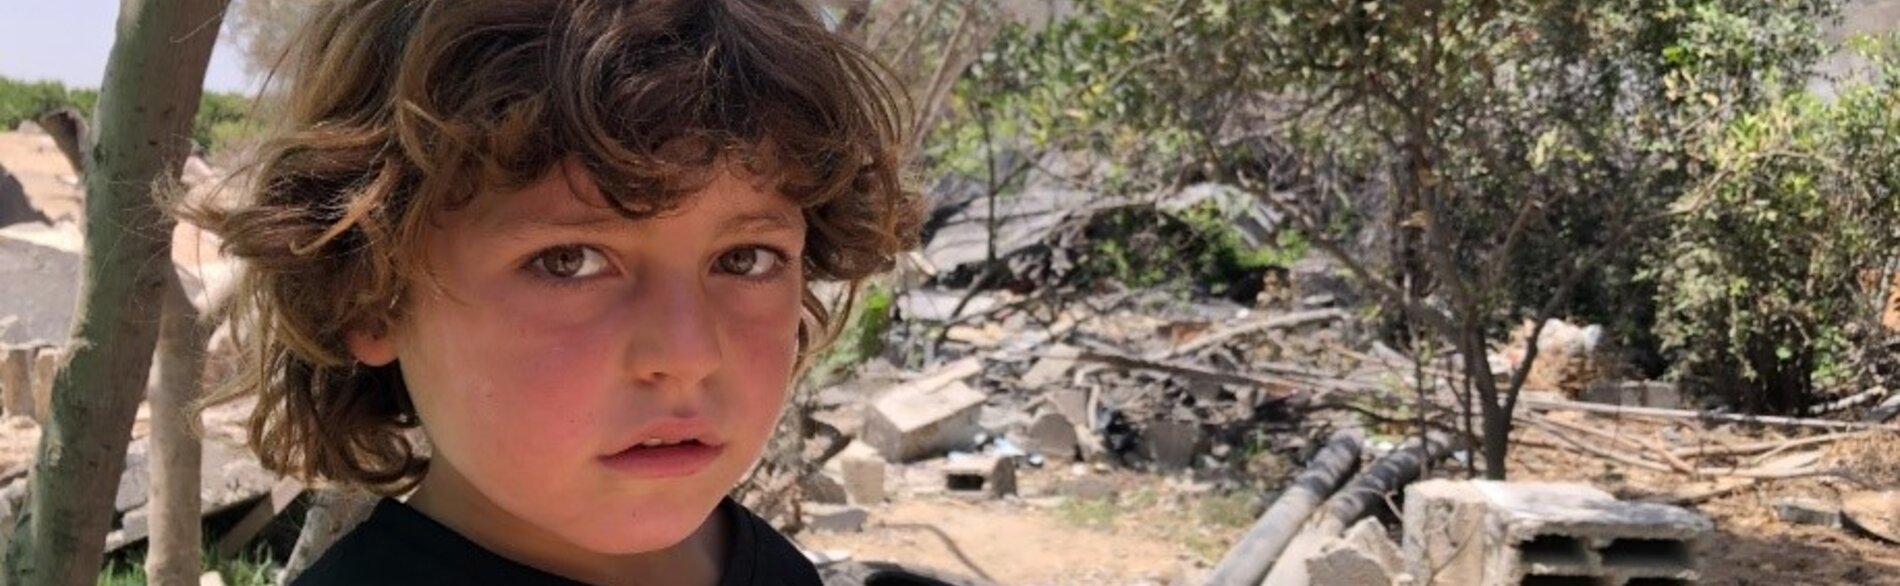 A child in Gaza beside a destroyed structure from the May escalation, 9 June 2021. Photo by OCHA